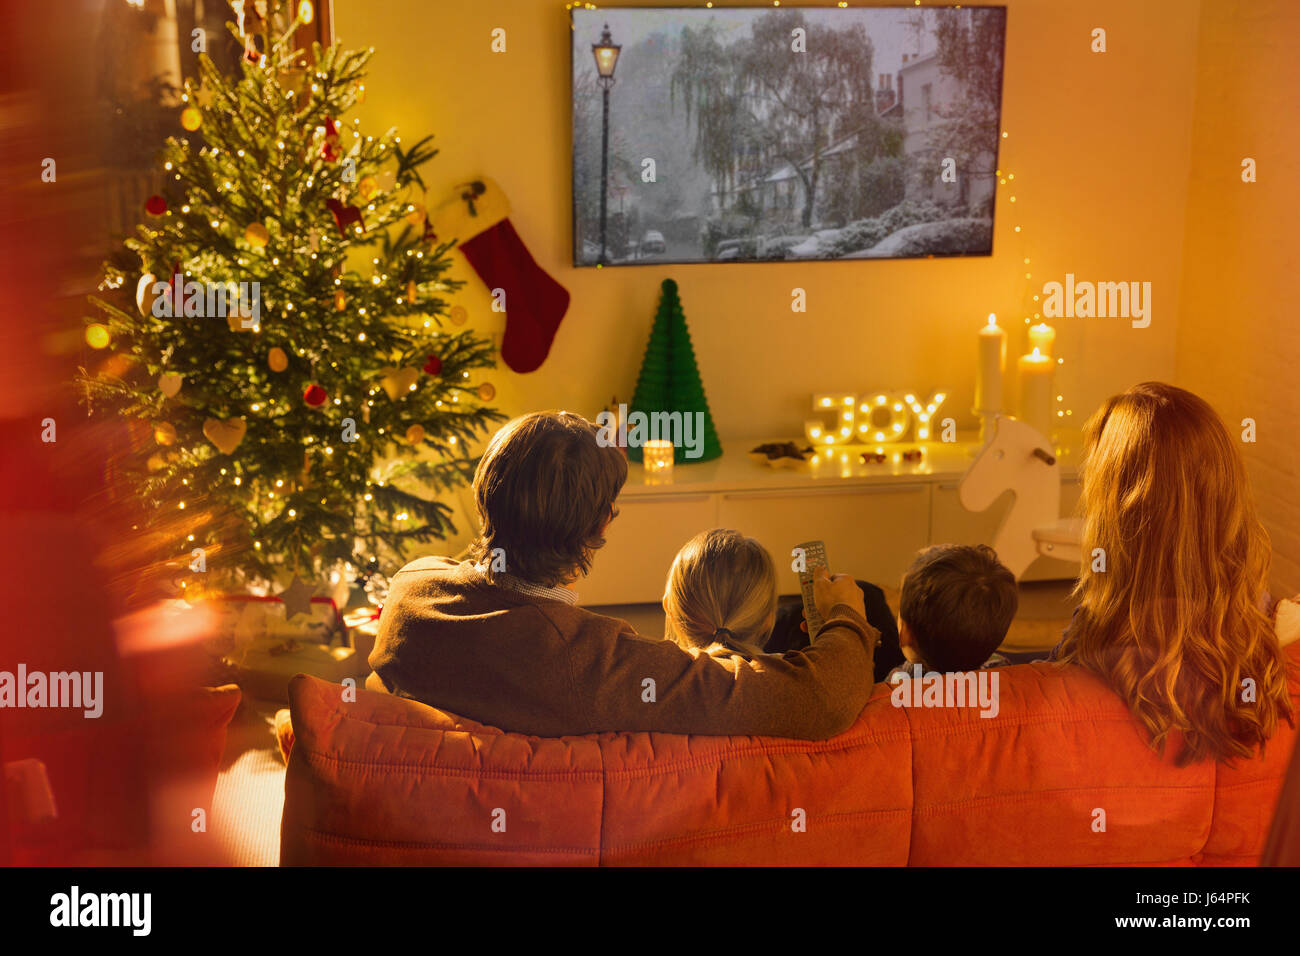 Family watching TV in Christmas living room Stock Photo